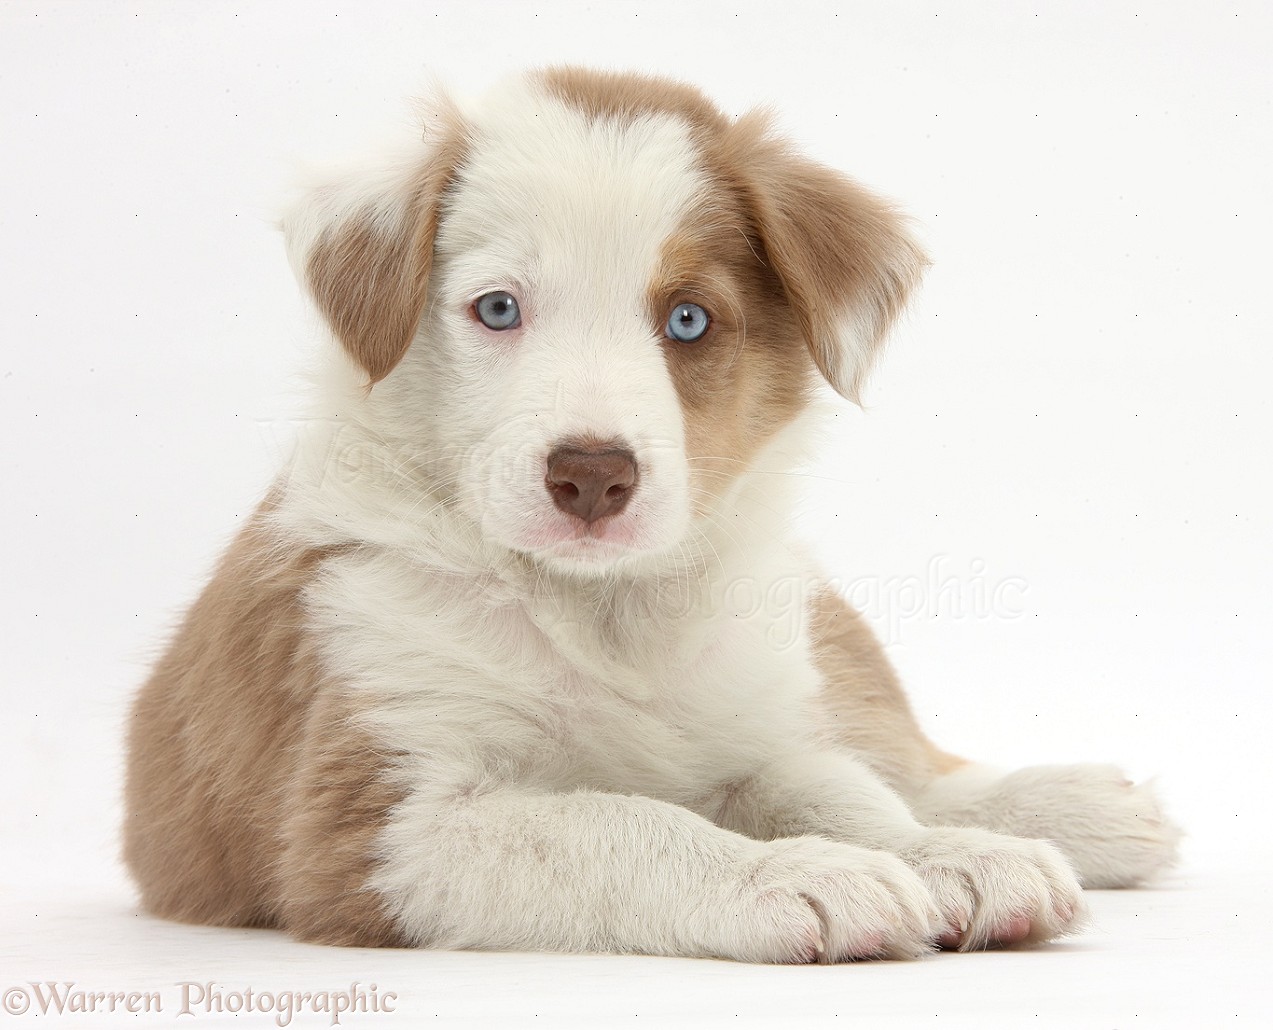 Dog Cute lilac Border Collie puppy, 7 weeks old photo WP40798